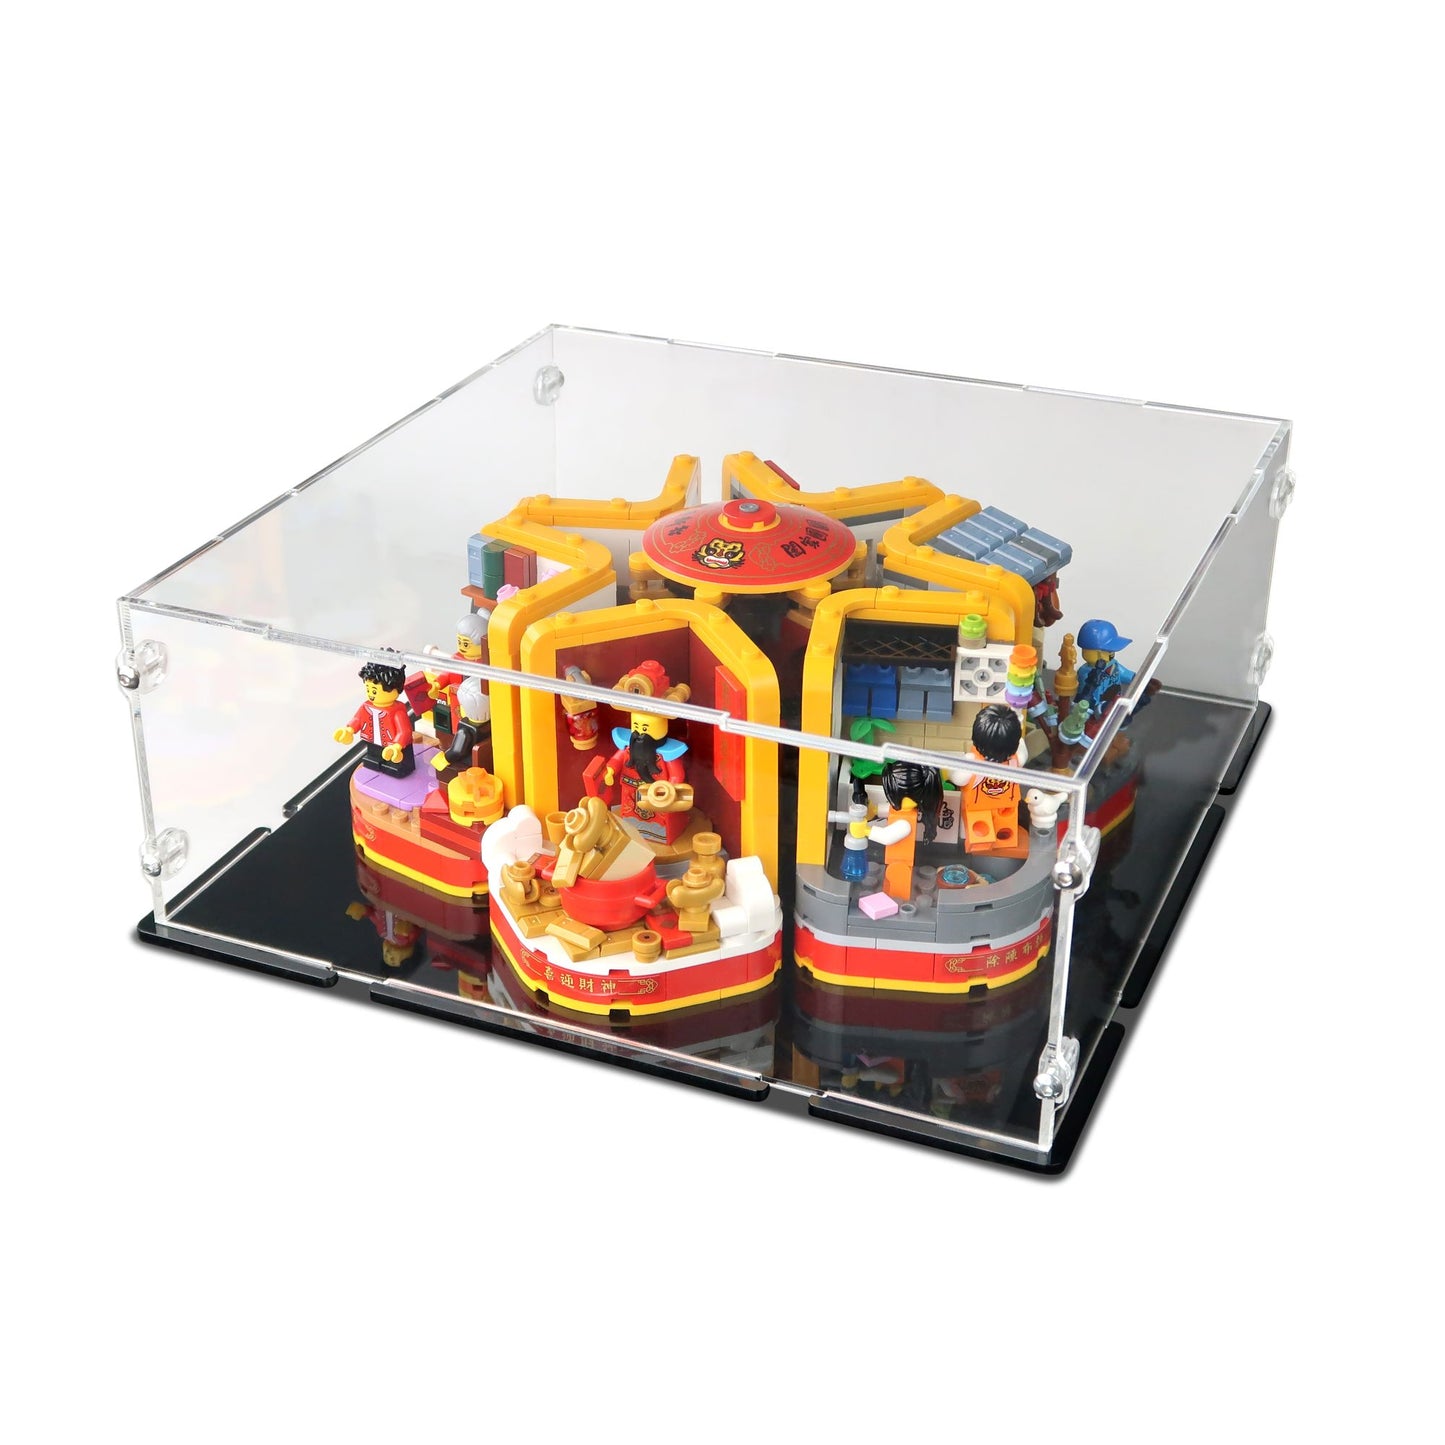 80108 Lunar New Year Traditions Display Case